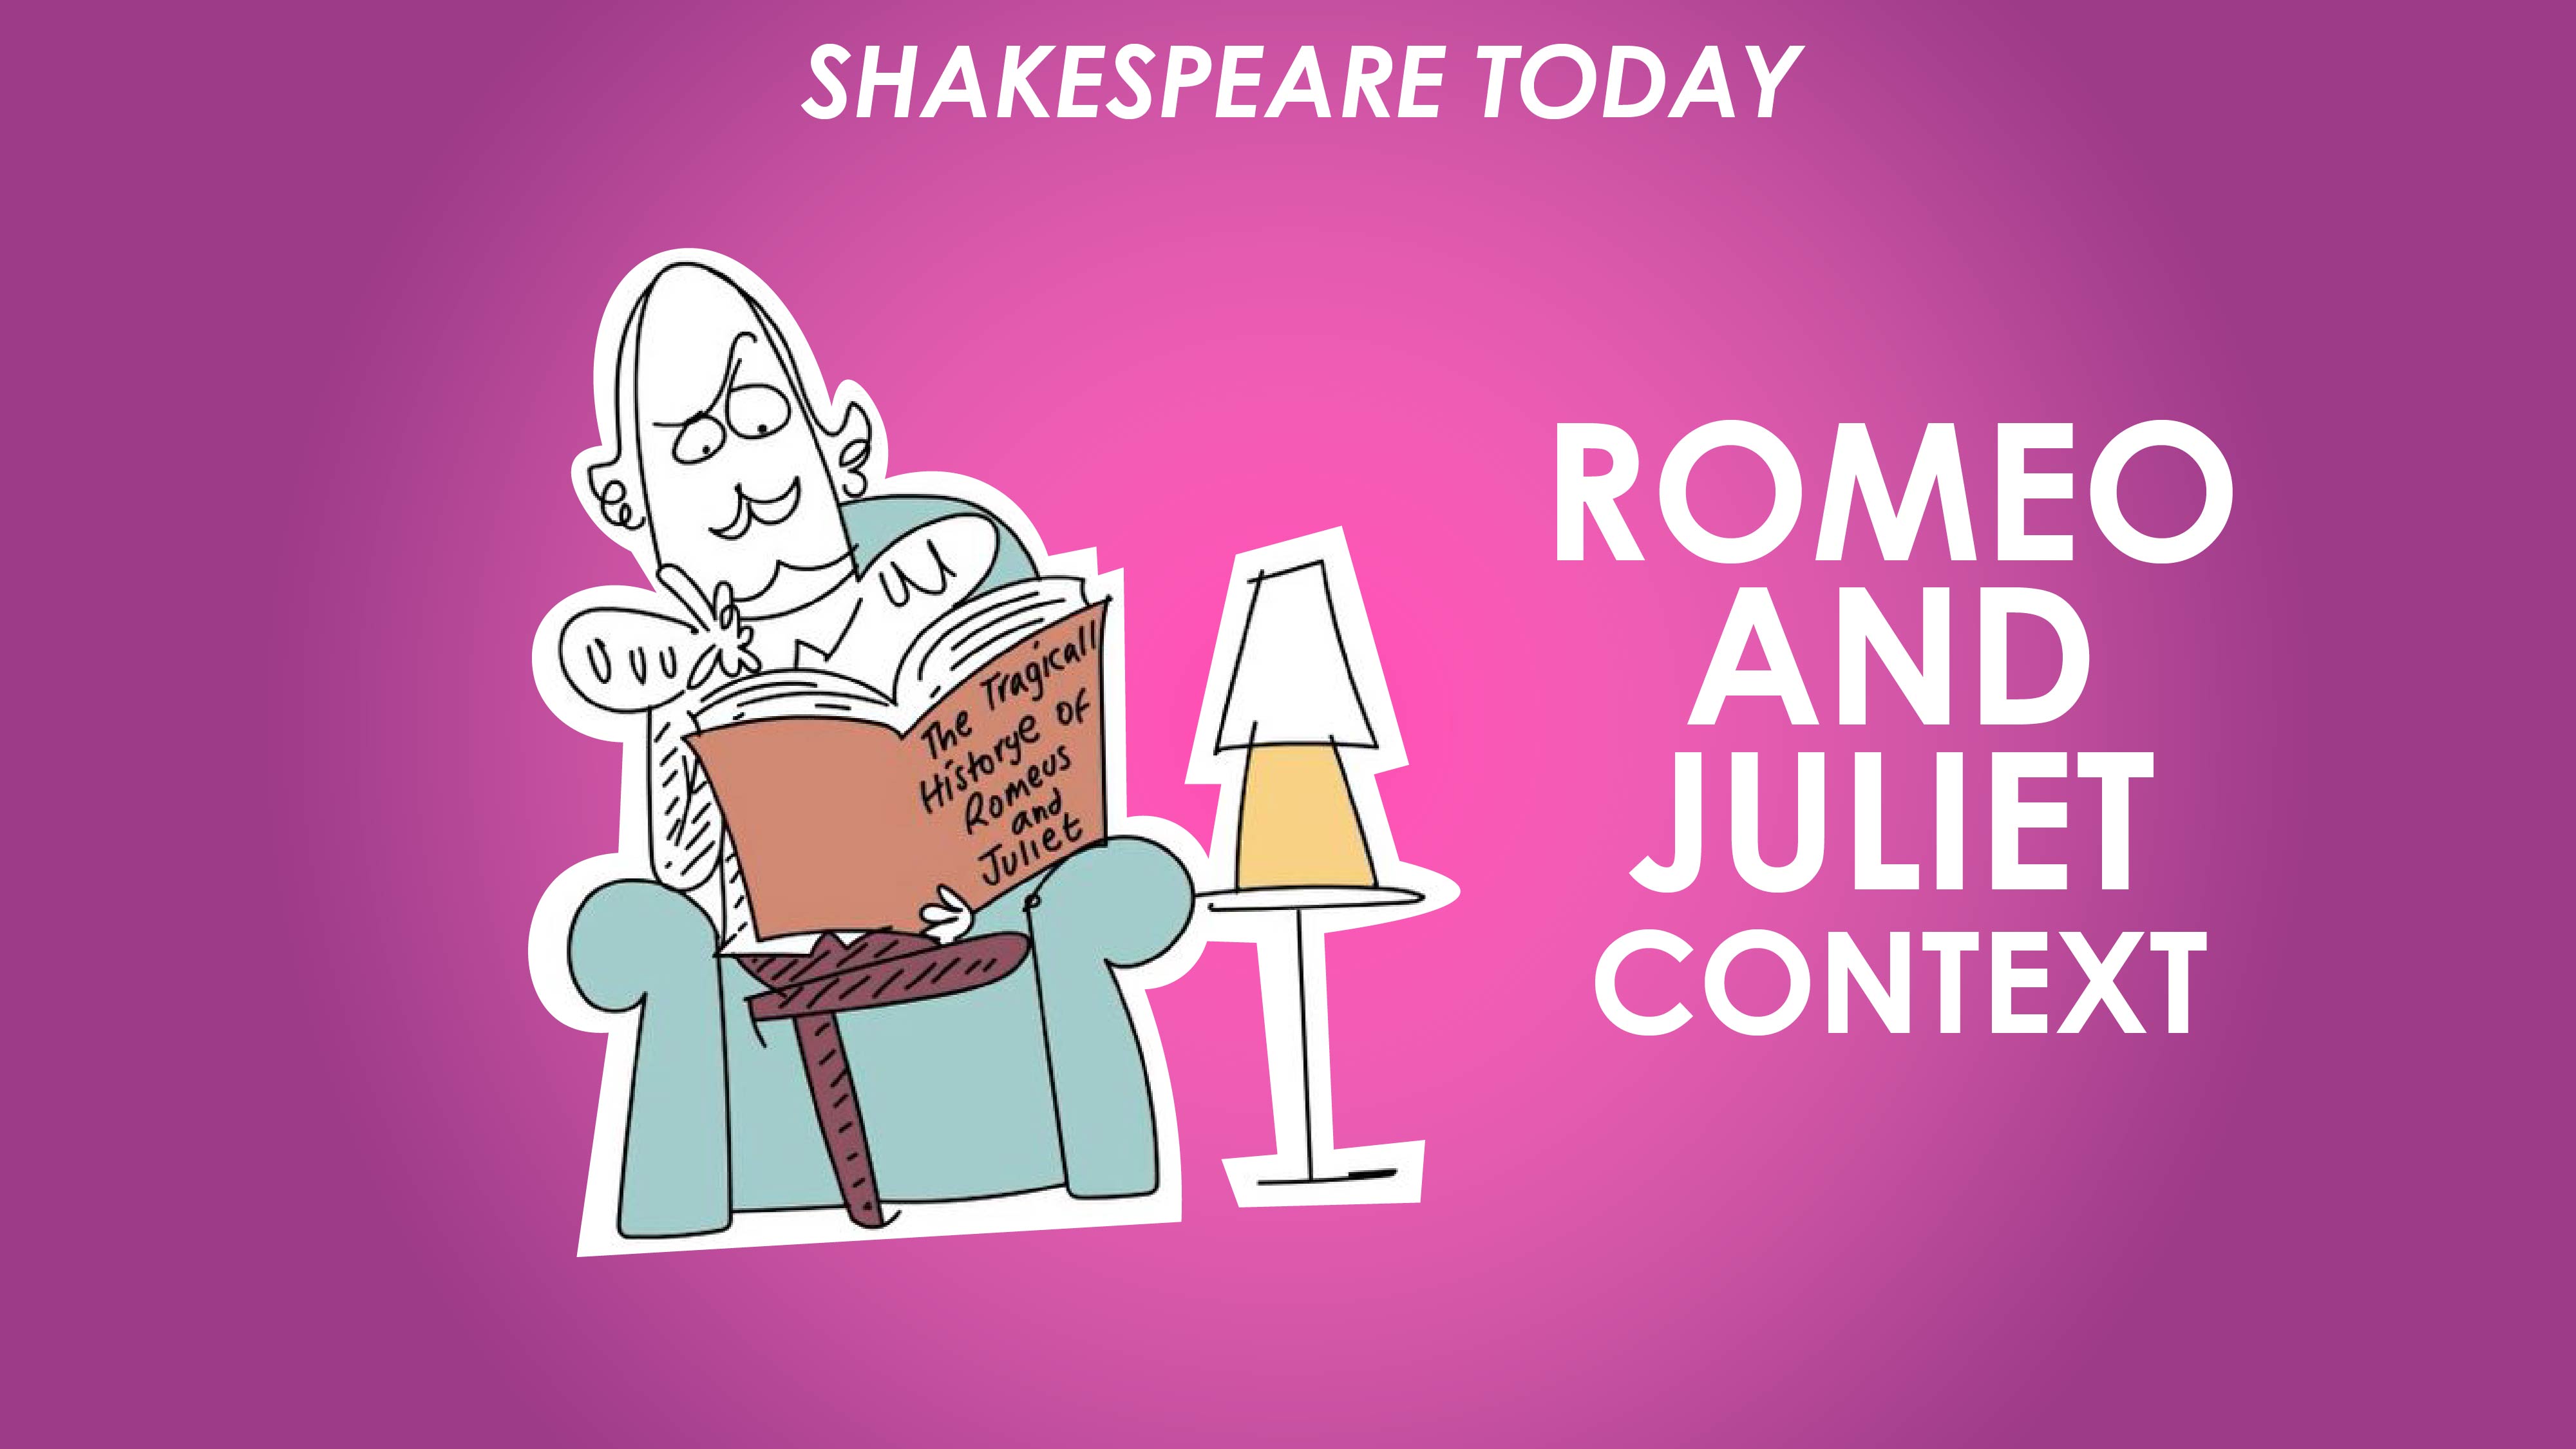 romeo-and-juliet-theme-of-death-and-mortality-shakespeare-today-series